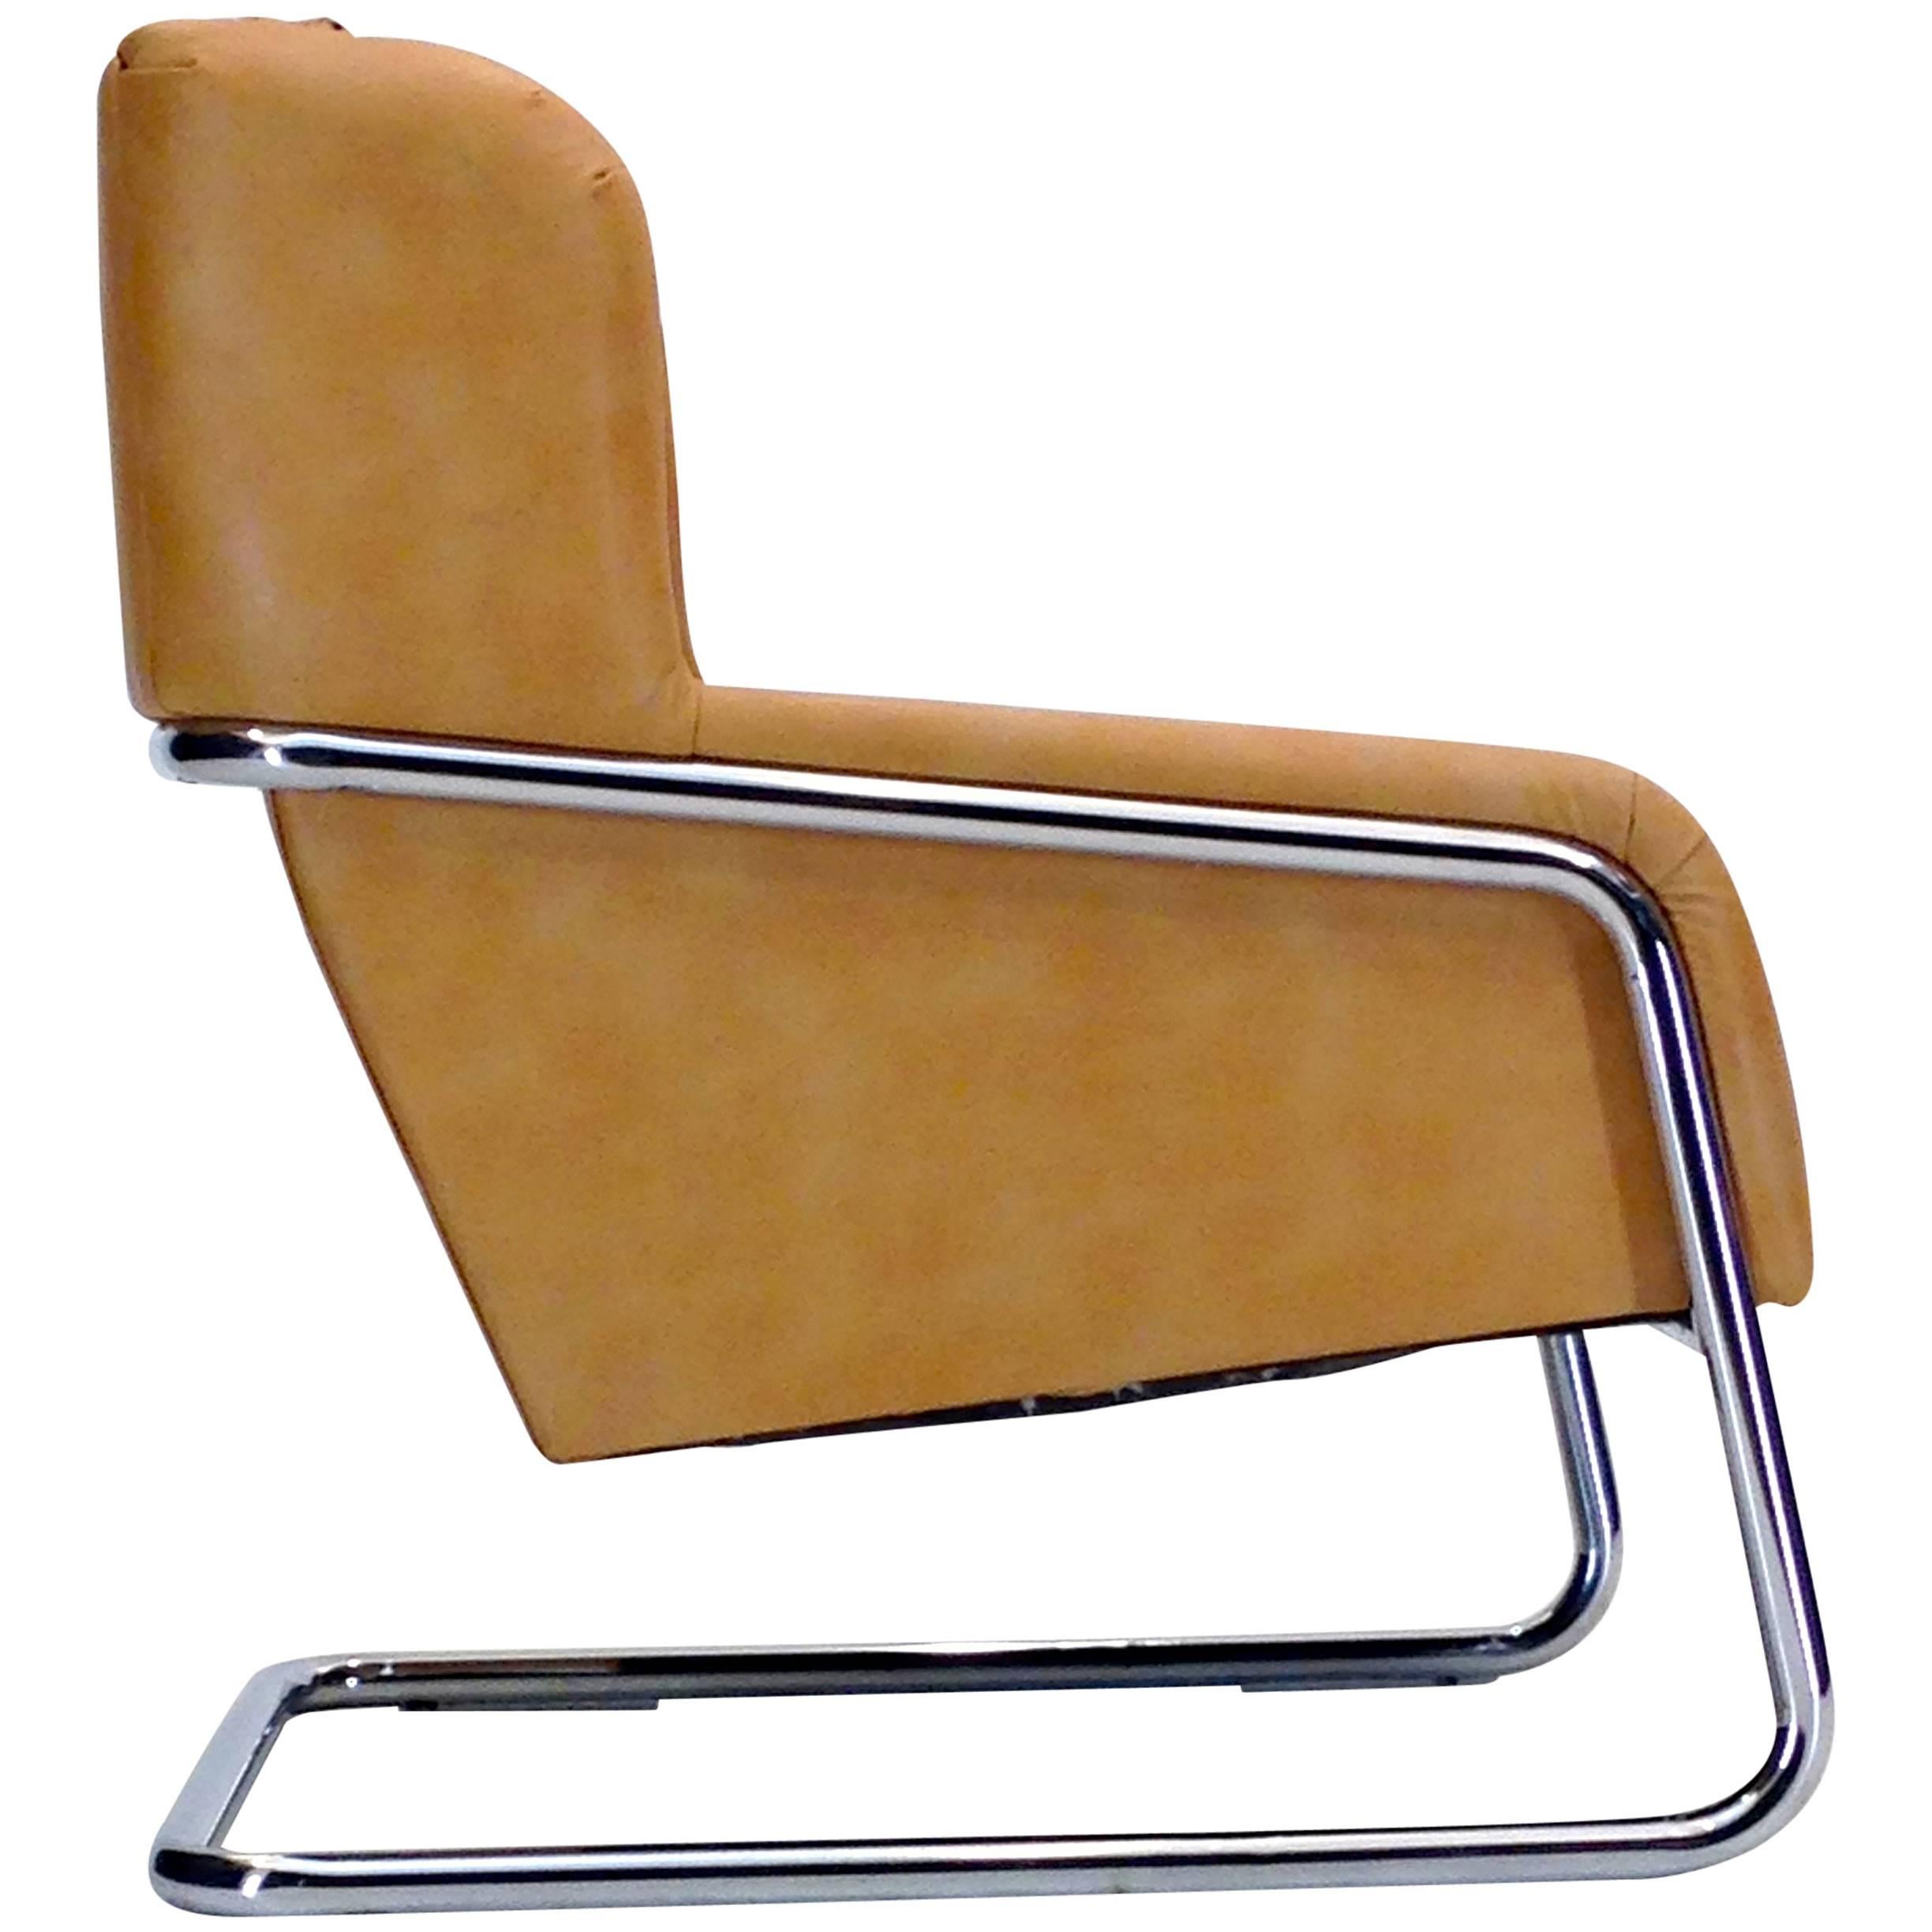 Large and sturdy Modernist Chrome Cantilevered Chair